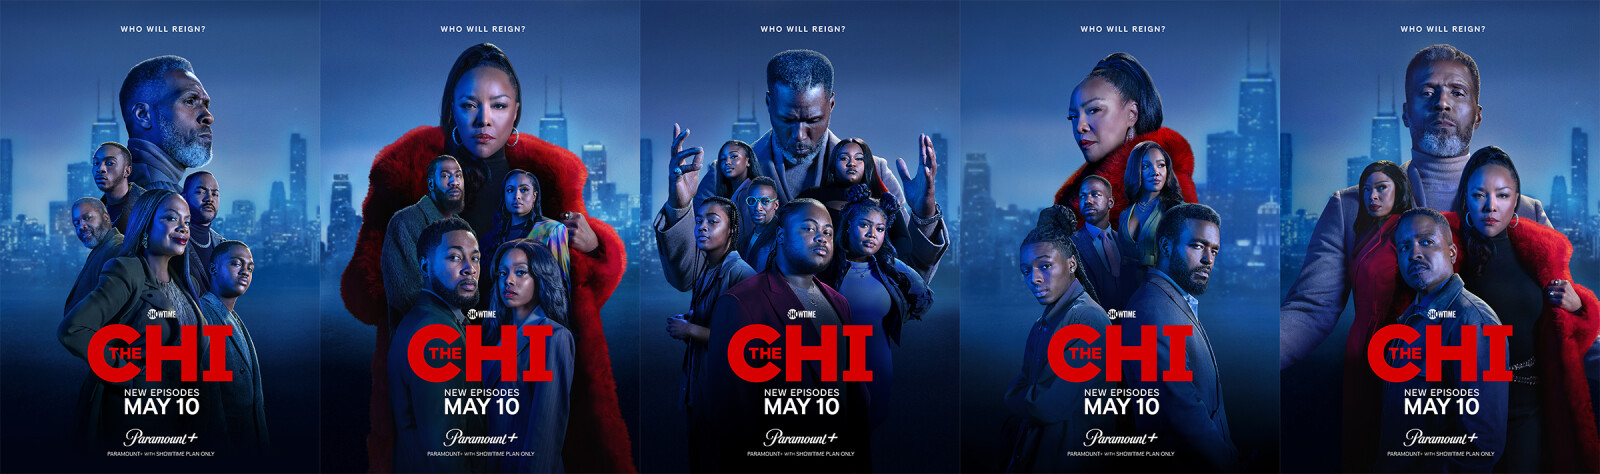 Paramount+ with Showtime Releases the Official Trailer and Key Art for "The Chi" from May 10